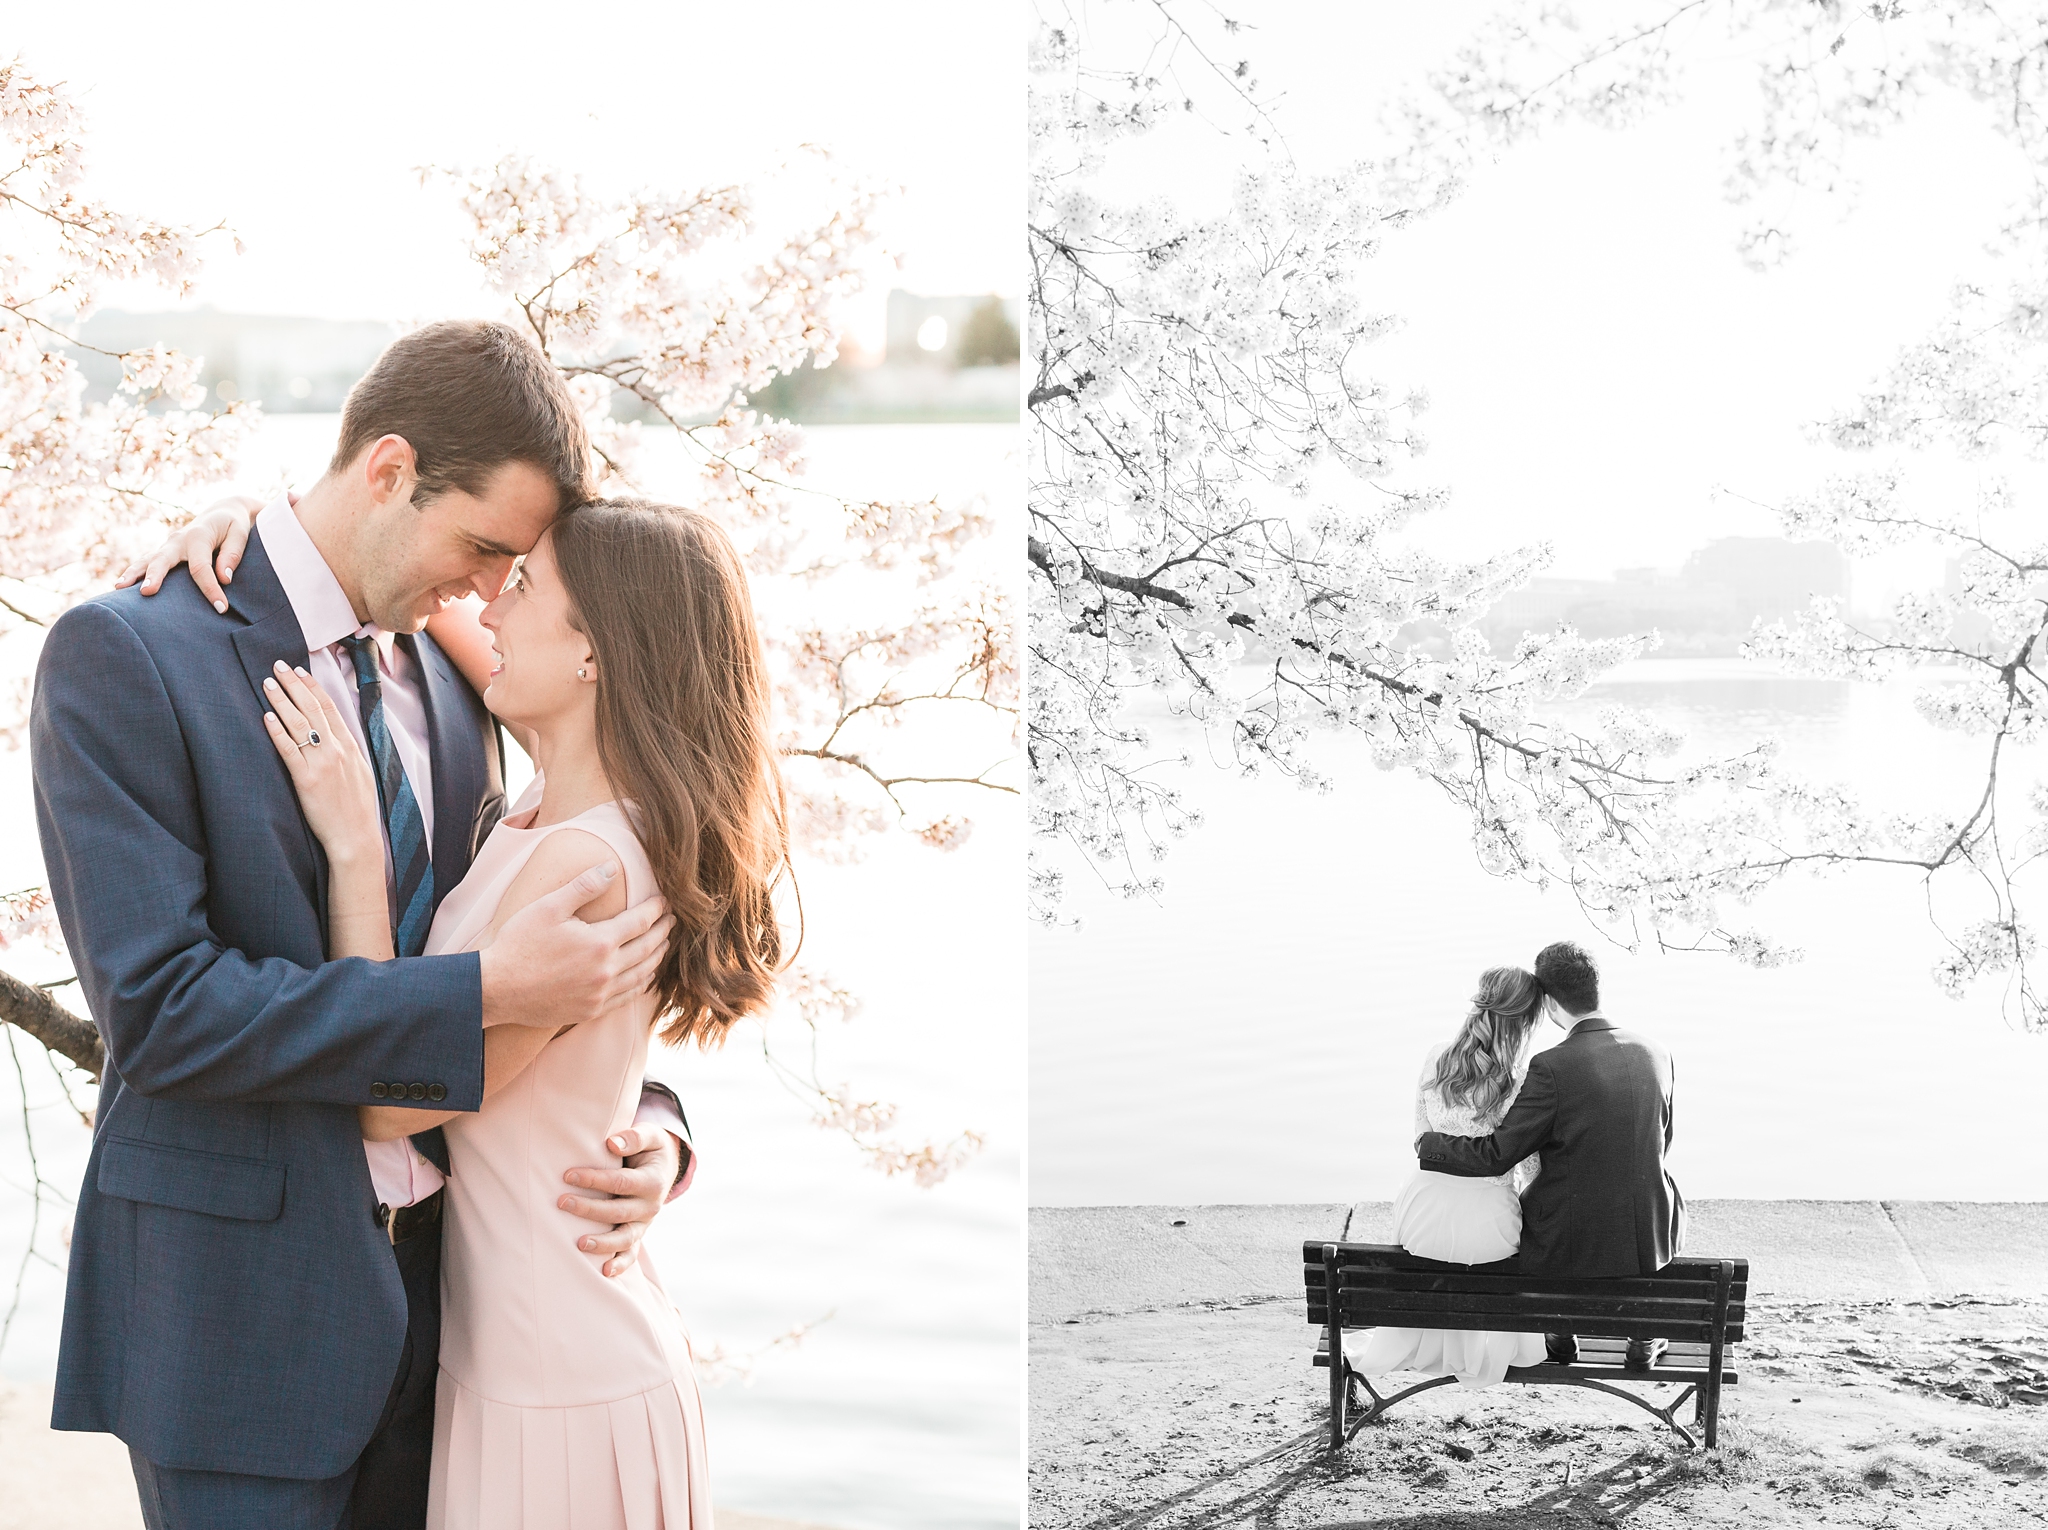 Here is the ultimate photography guide to cherry blossom engagement photos at the Tidal Basin in Washington, DC!